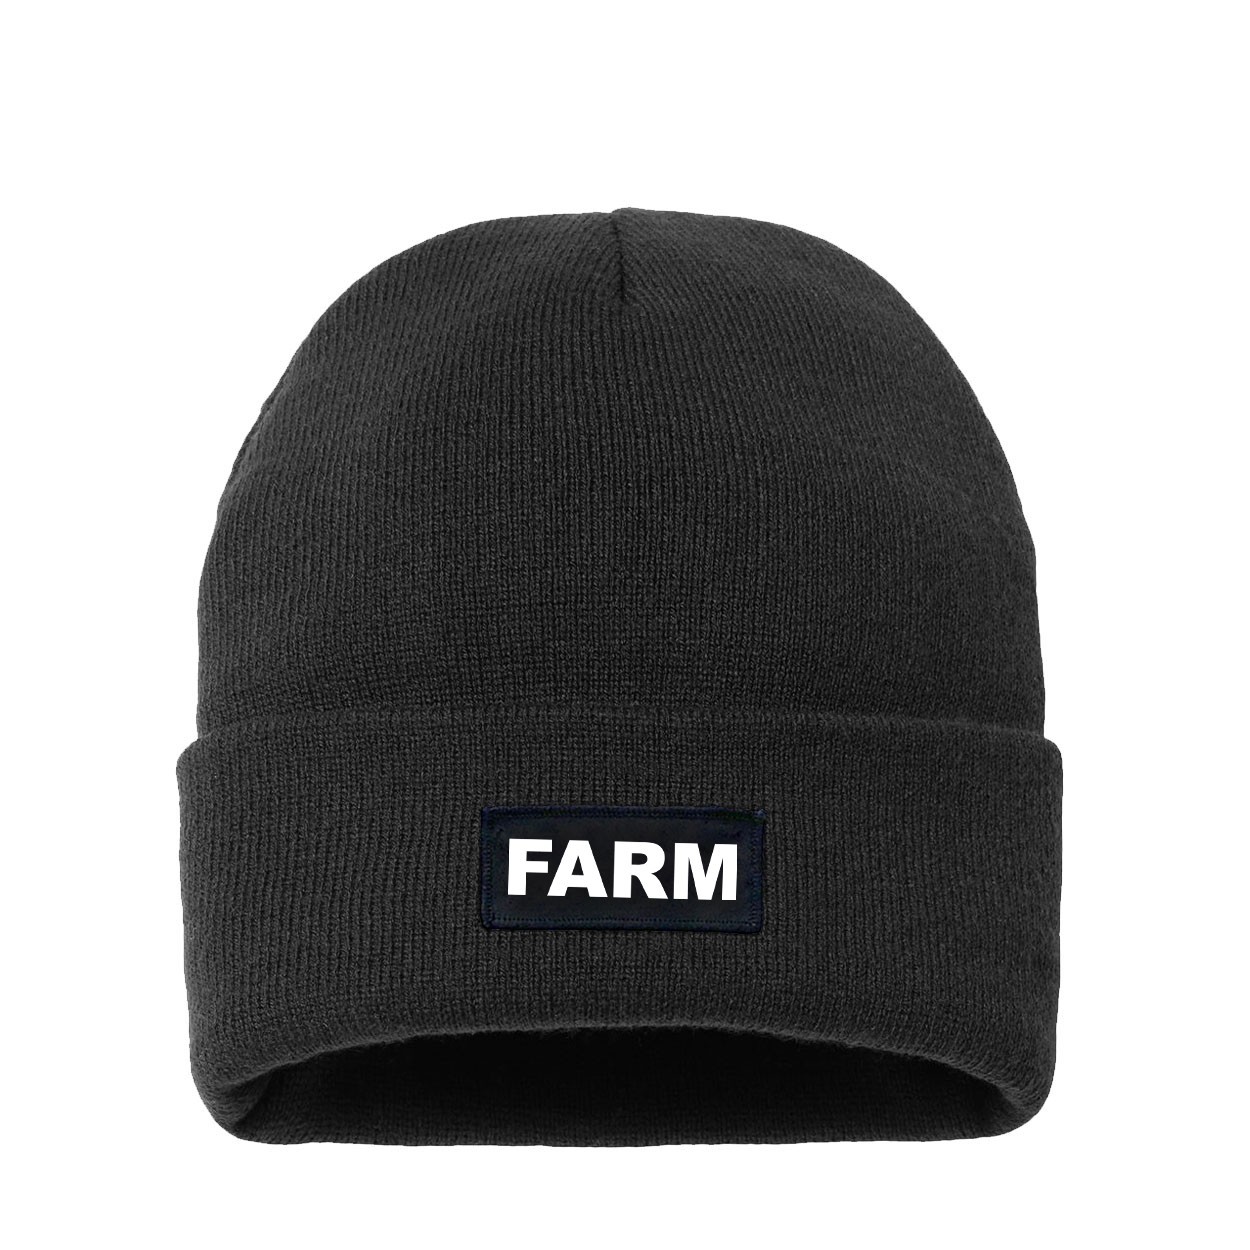 Farm Brand Logo Night Out Woven Patch Night Out Sherpa Lined Cuffed Beanie Black (White Logo)